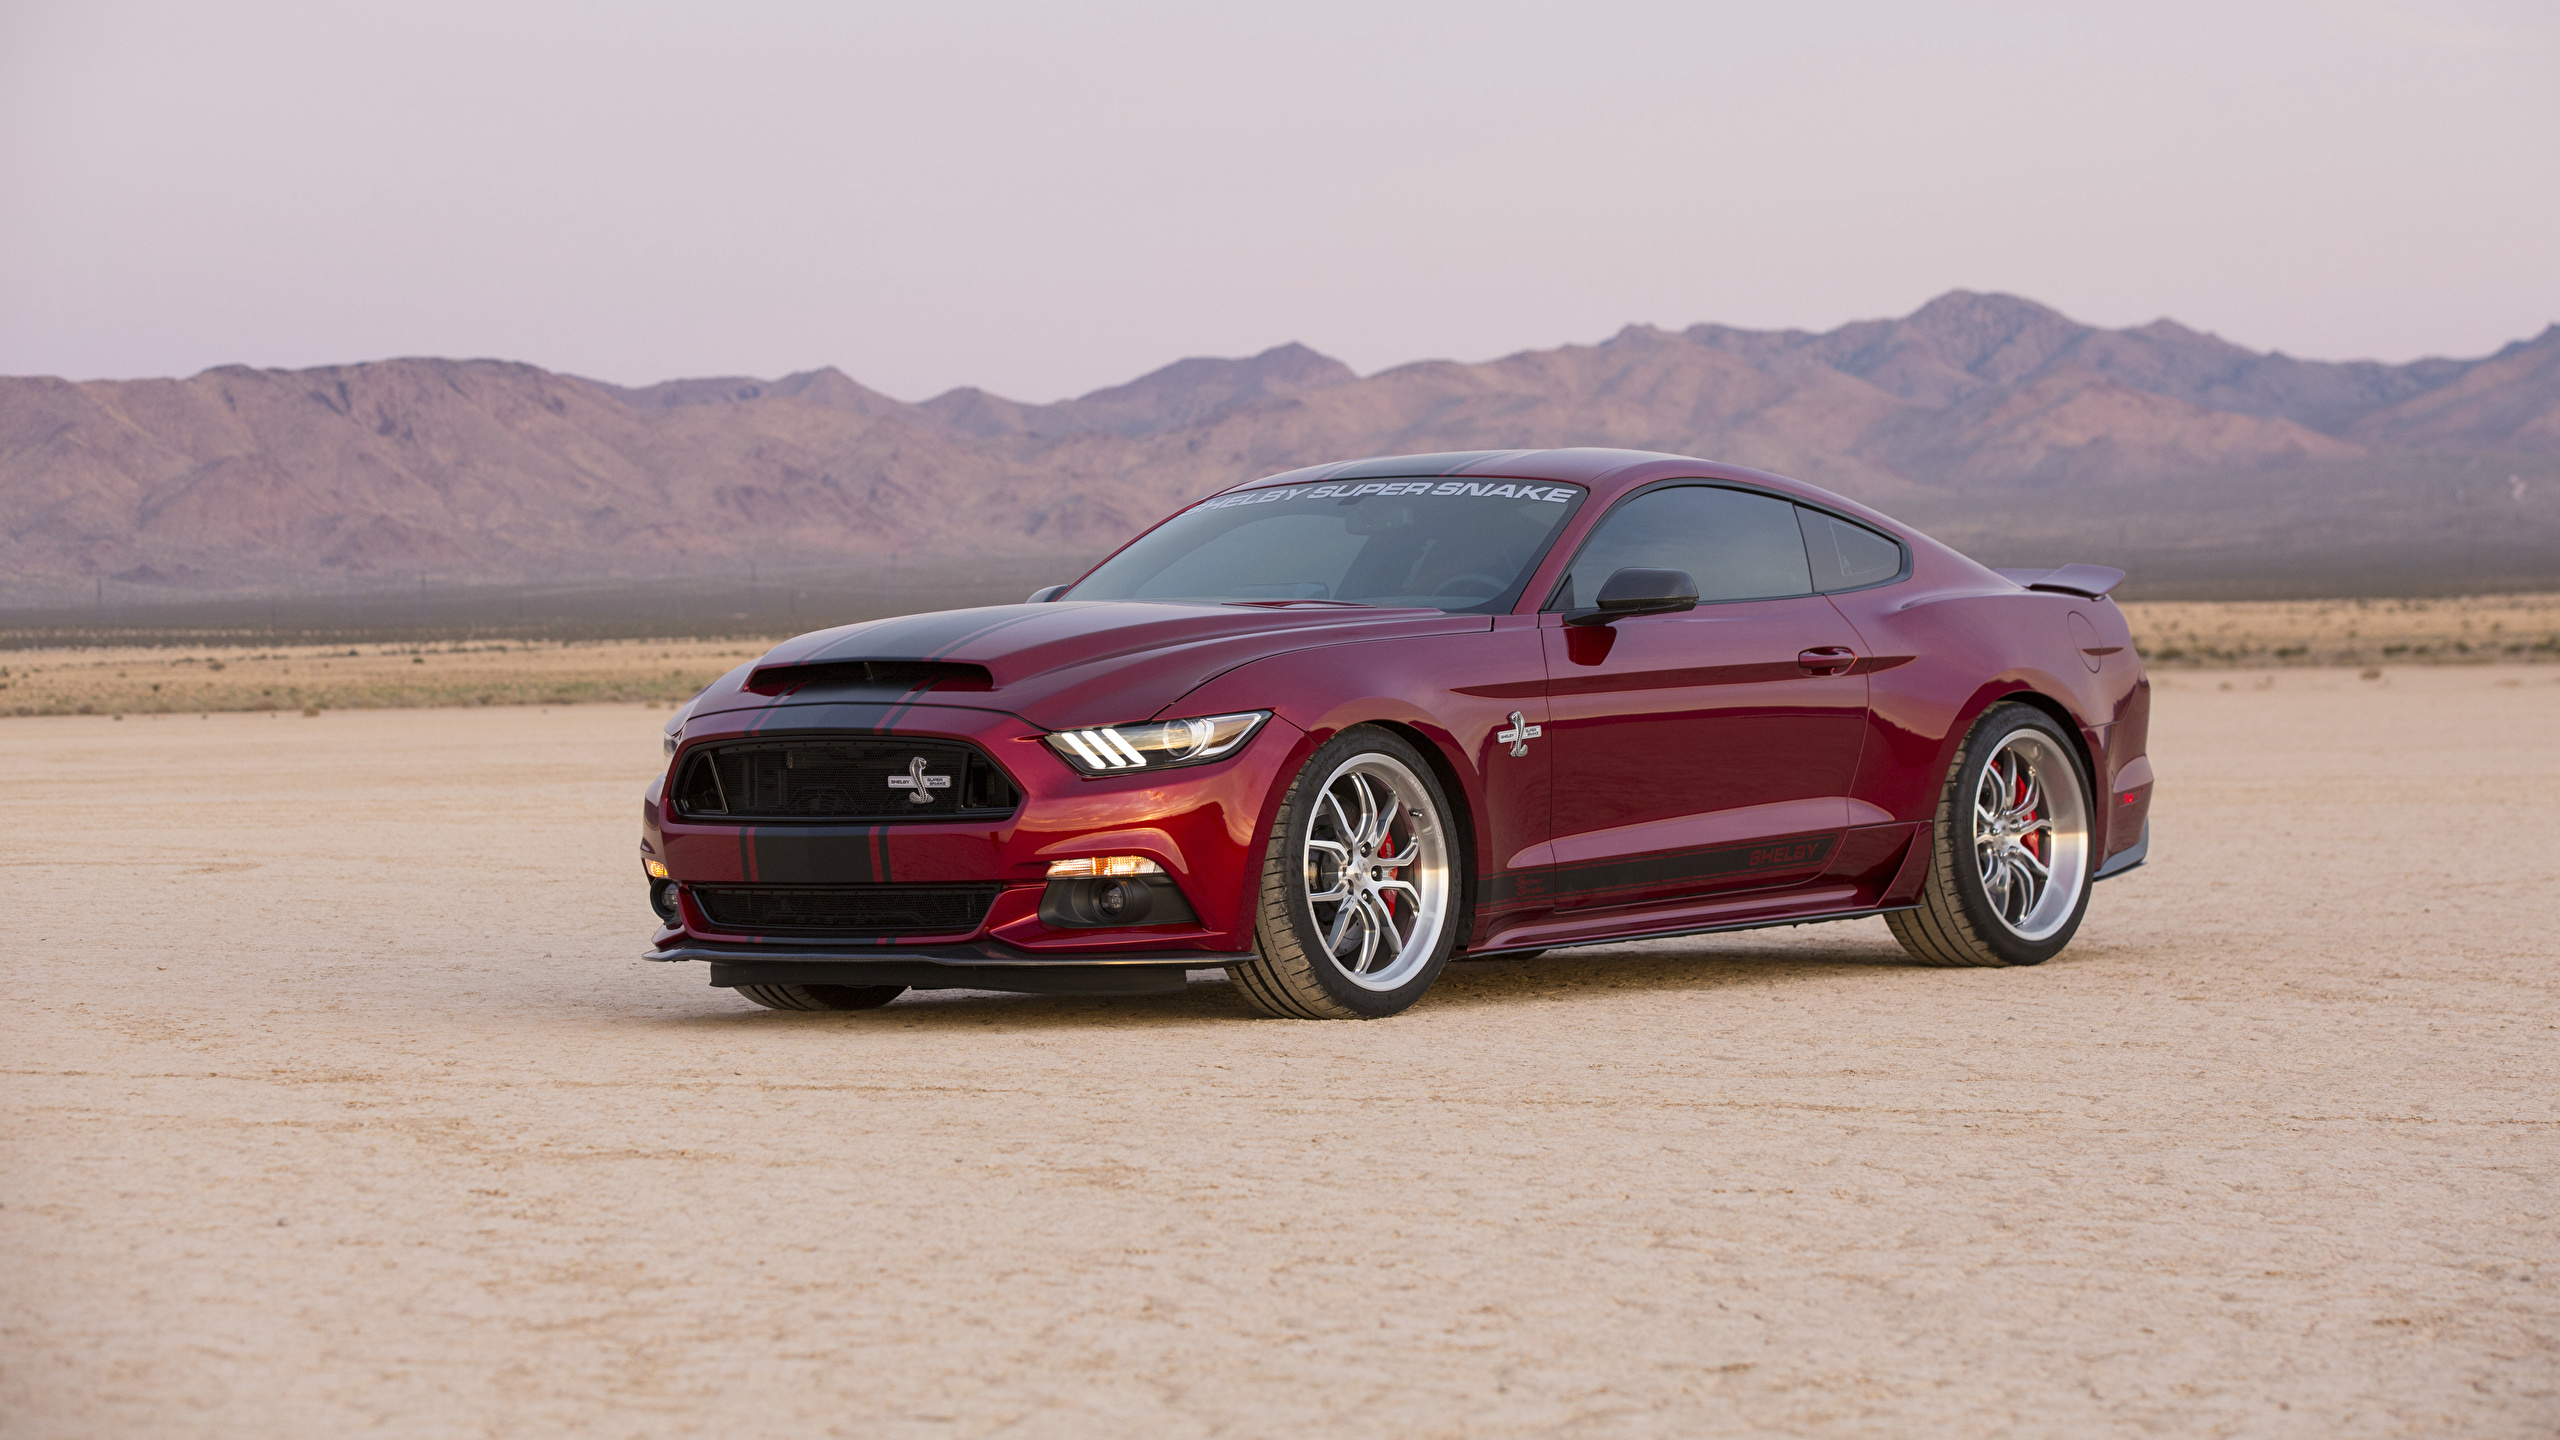 Ford Shelby, 2015, Super Snake, Mustang Бордовый Автомобили фото 2560x1440 ...